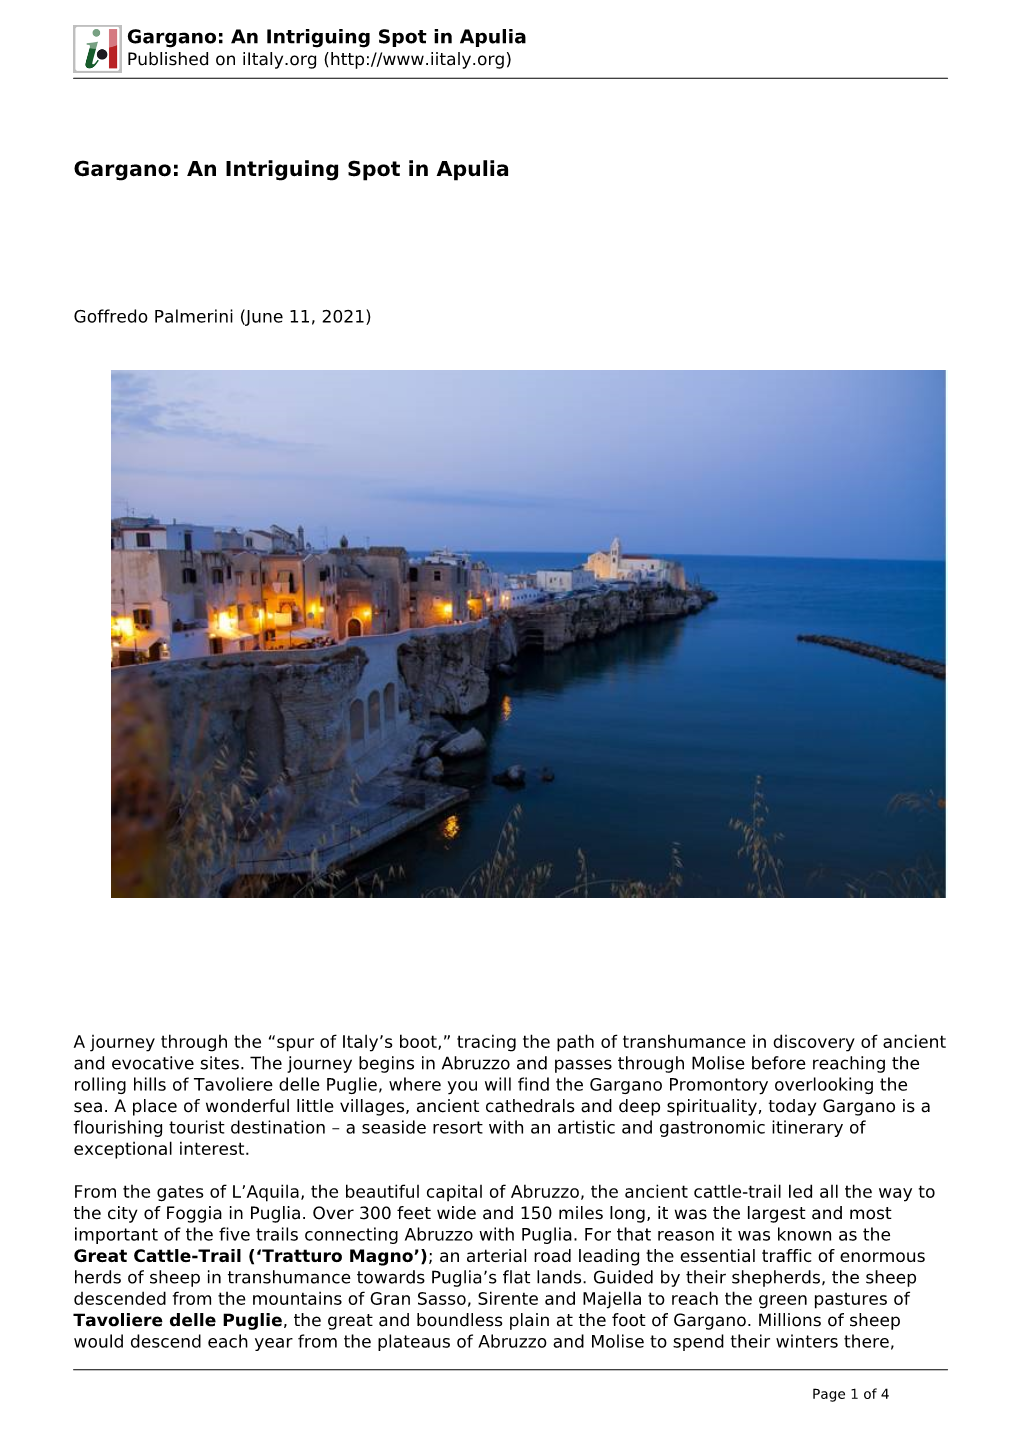 Gargano: an Intriguing Spot in Apulia Published on Iitaly.Org (